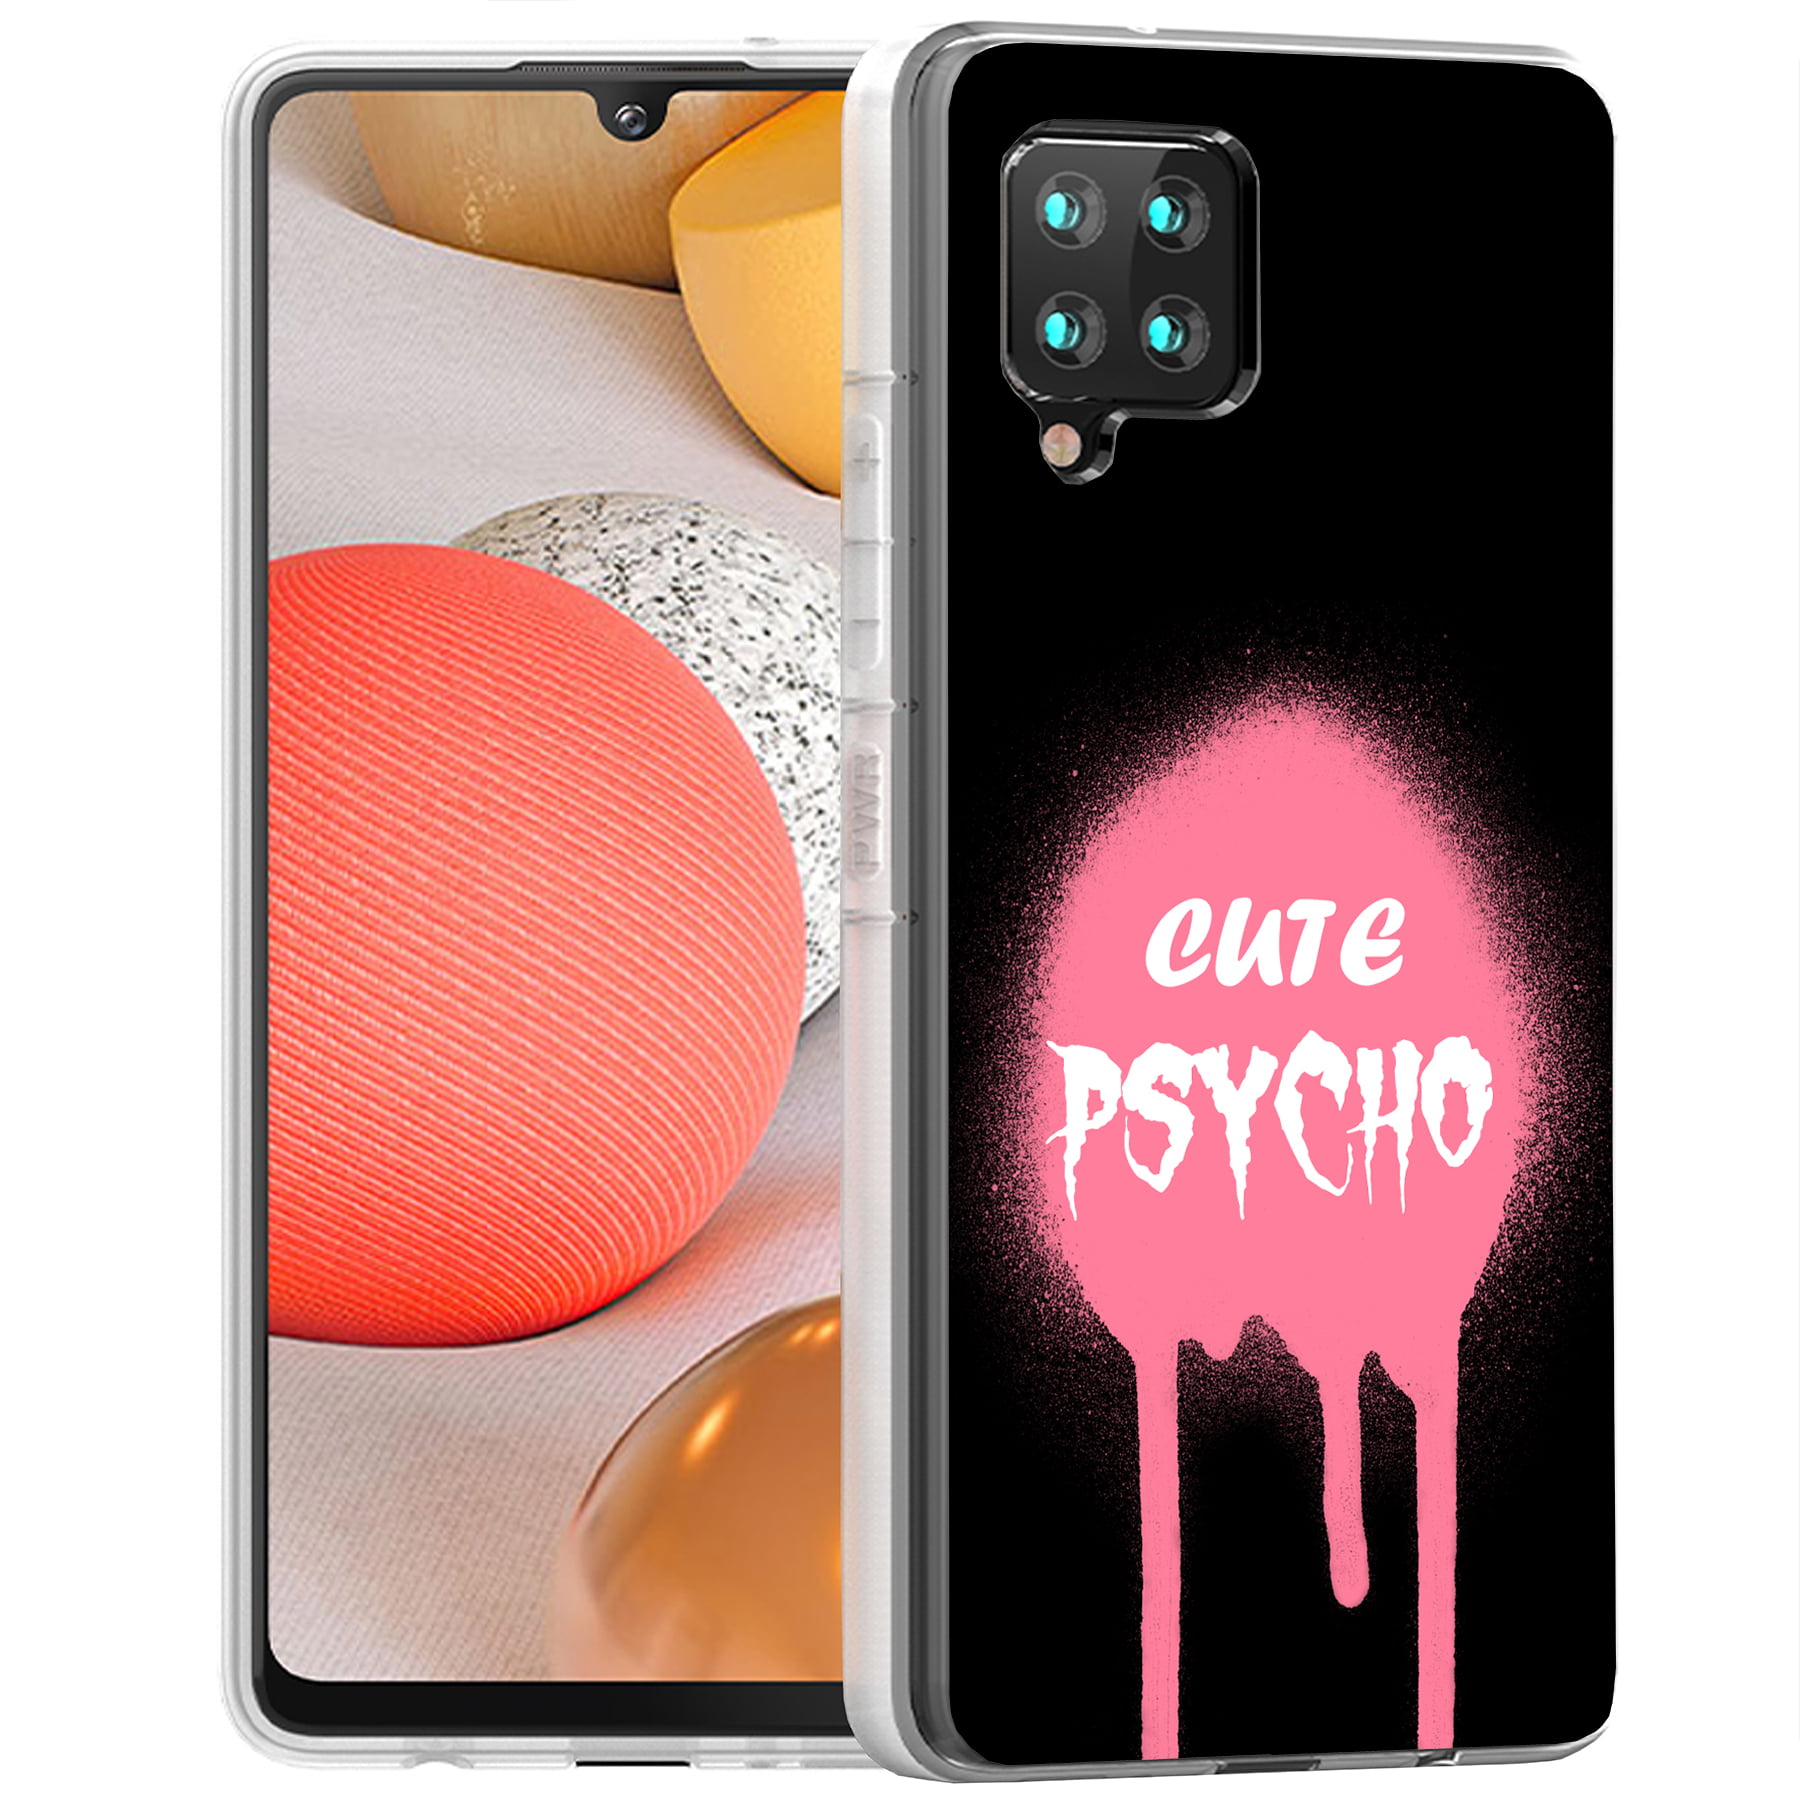 TalkingCase Slim Case Cover for Samsung Galaxy A42 5G, Funny Quote Psycho  Print, Thin, Flexible, Soft, Printed in USA 